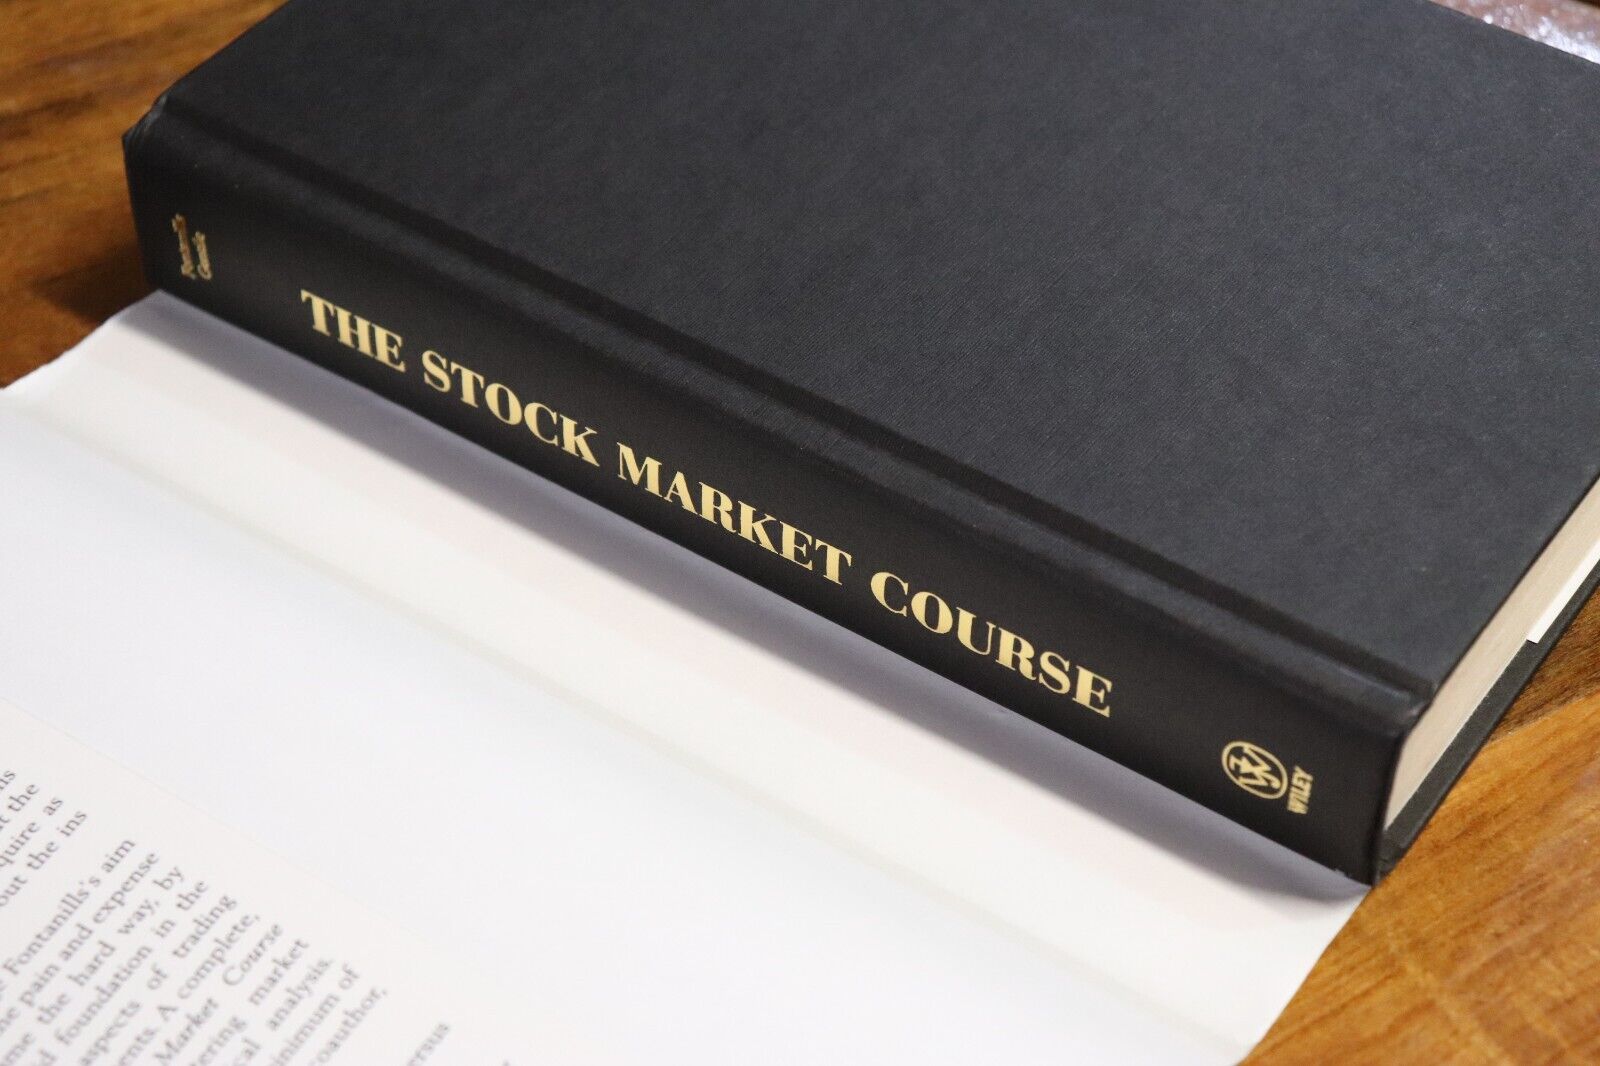 The Stock Market Course by GA Fontanills - 2001 - Stock Market Investing Book